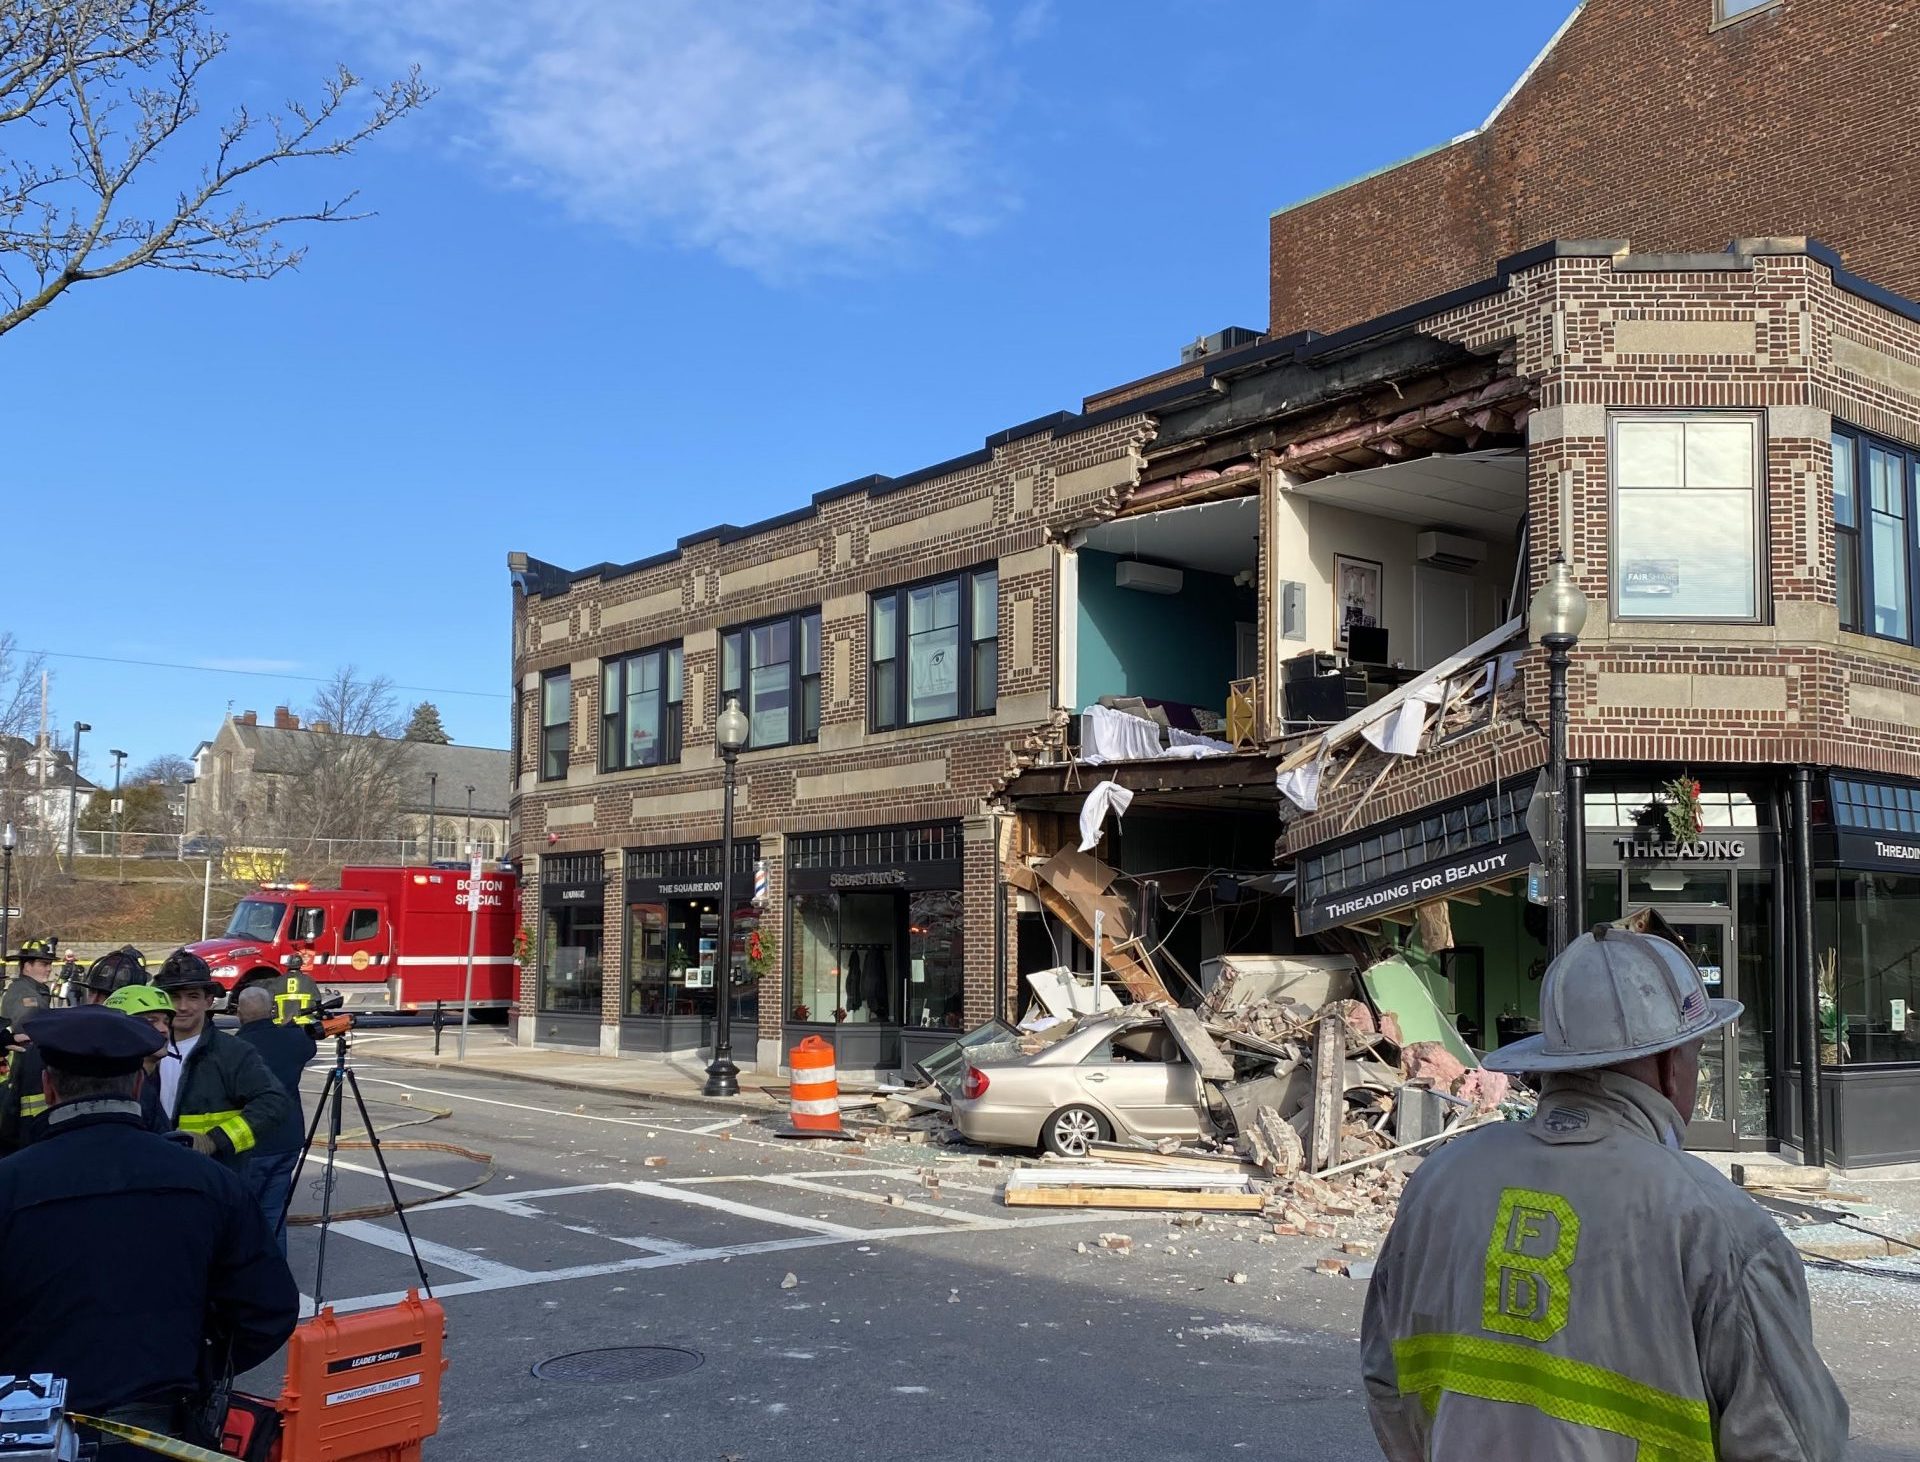 The aftermath of a car crash. A gold-colored Toyota sedan is buried in rubble with its front end poking into a barbershop on the ground floor of a two-story brick building with several small business storefronts. Above it, a section of the building's wall is completely collapsed, leaving second-floor offices exposed to the open air. Several firefighters mill about in the foreground across the street.